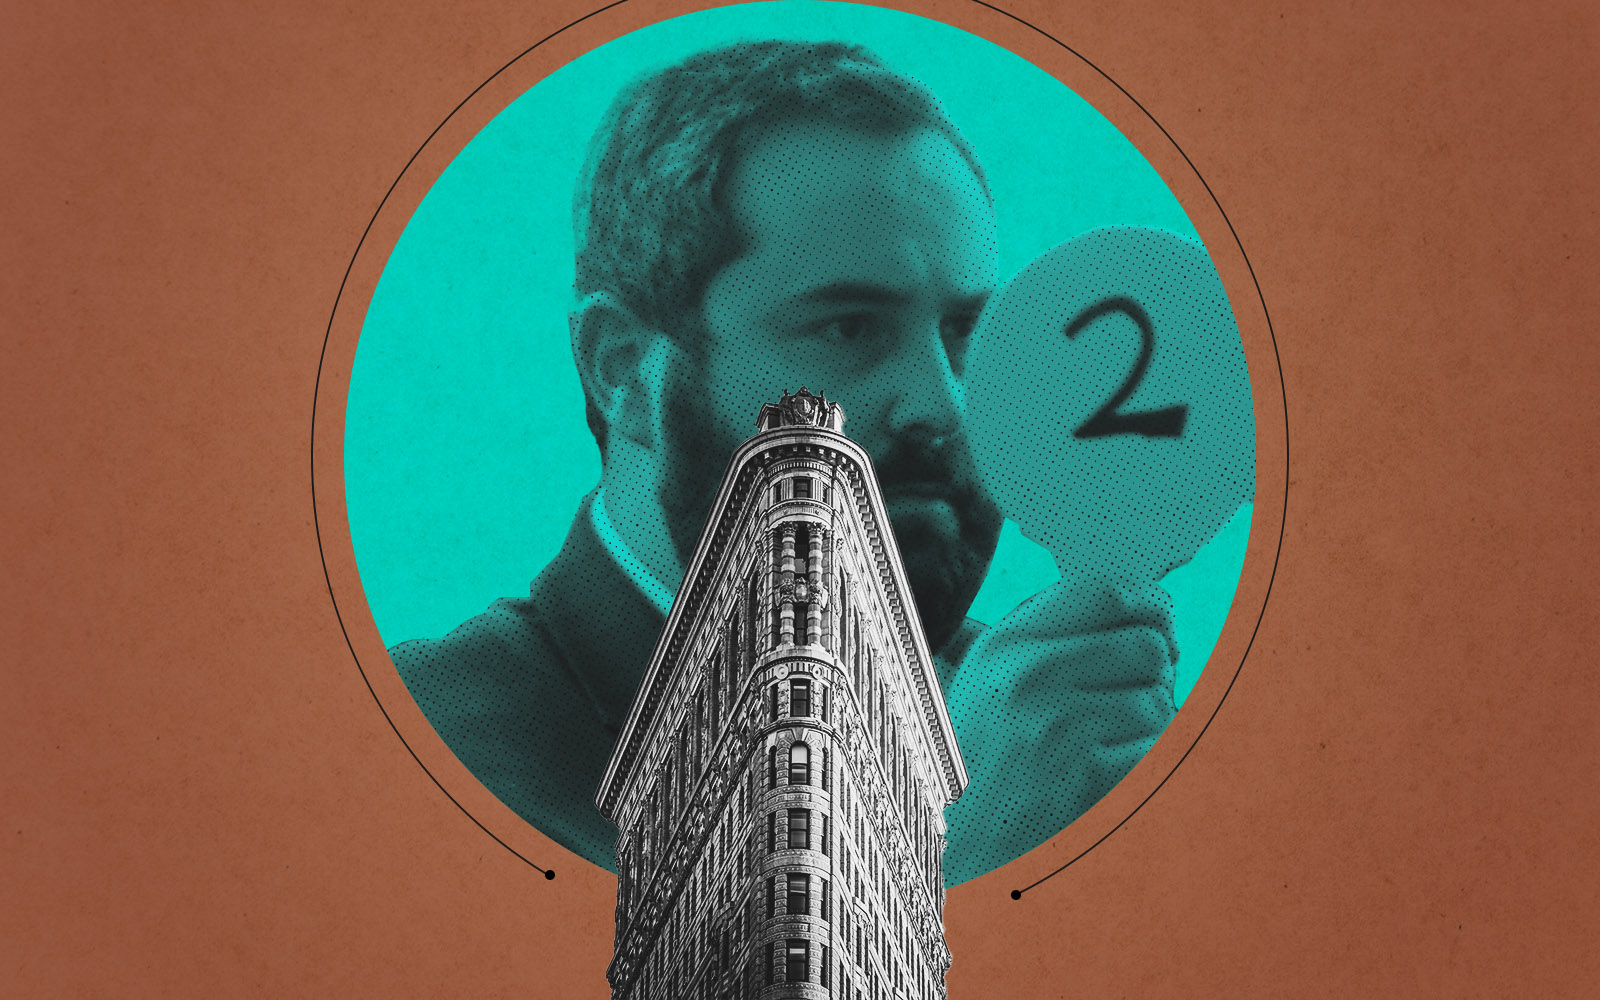 Meet the mysterious buyer of the Flatiron Building